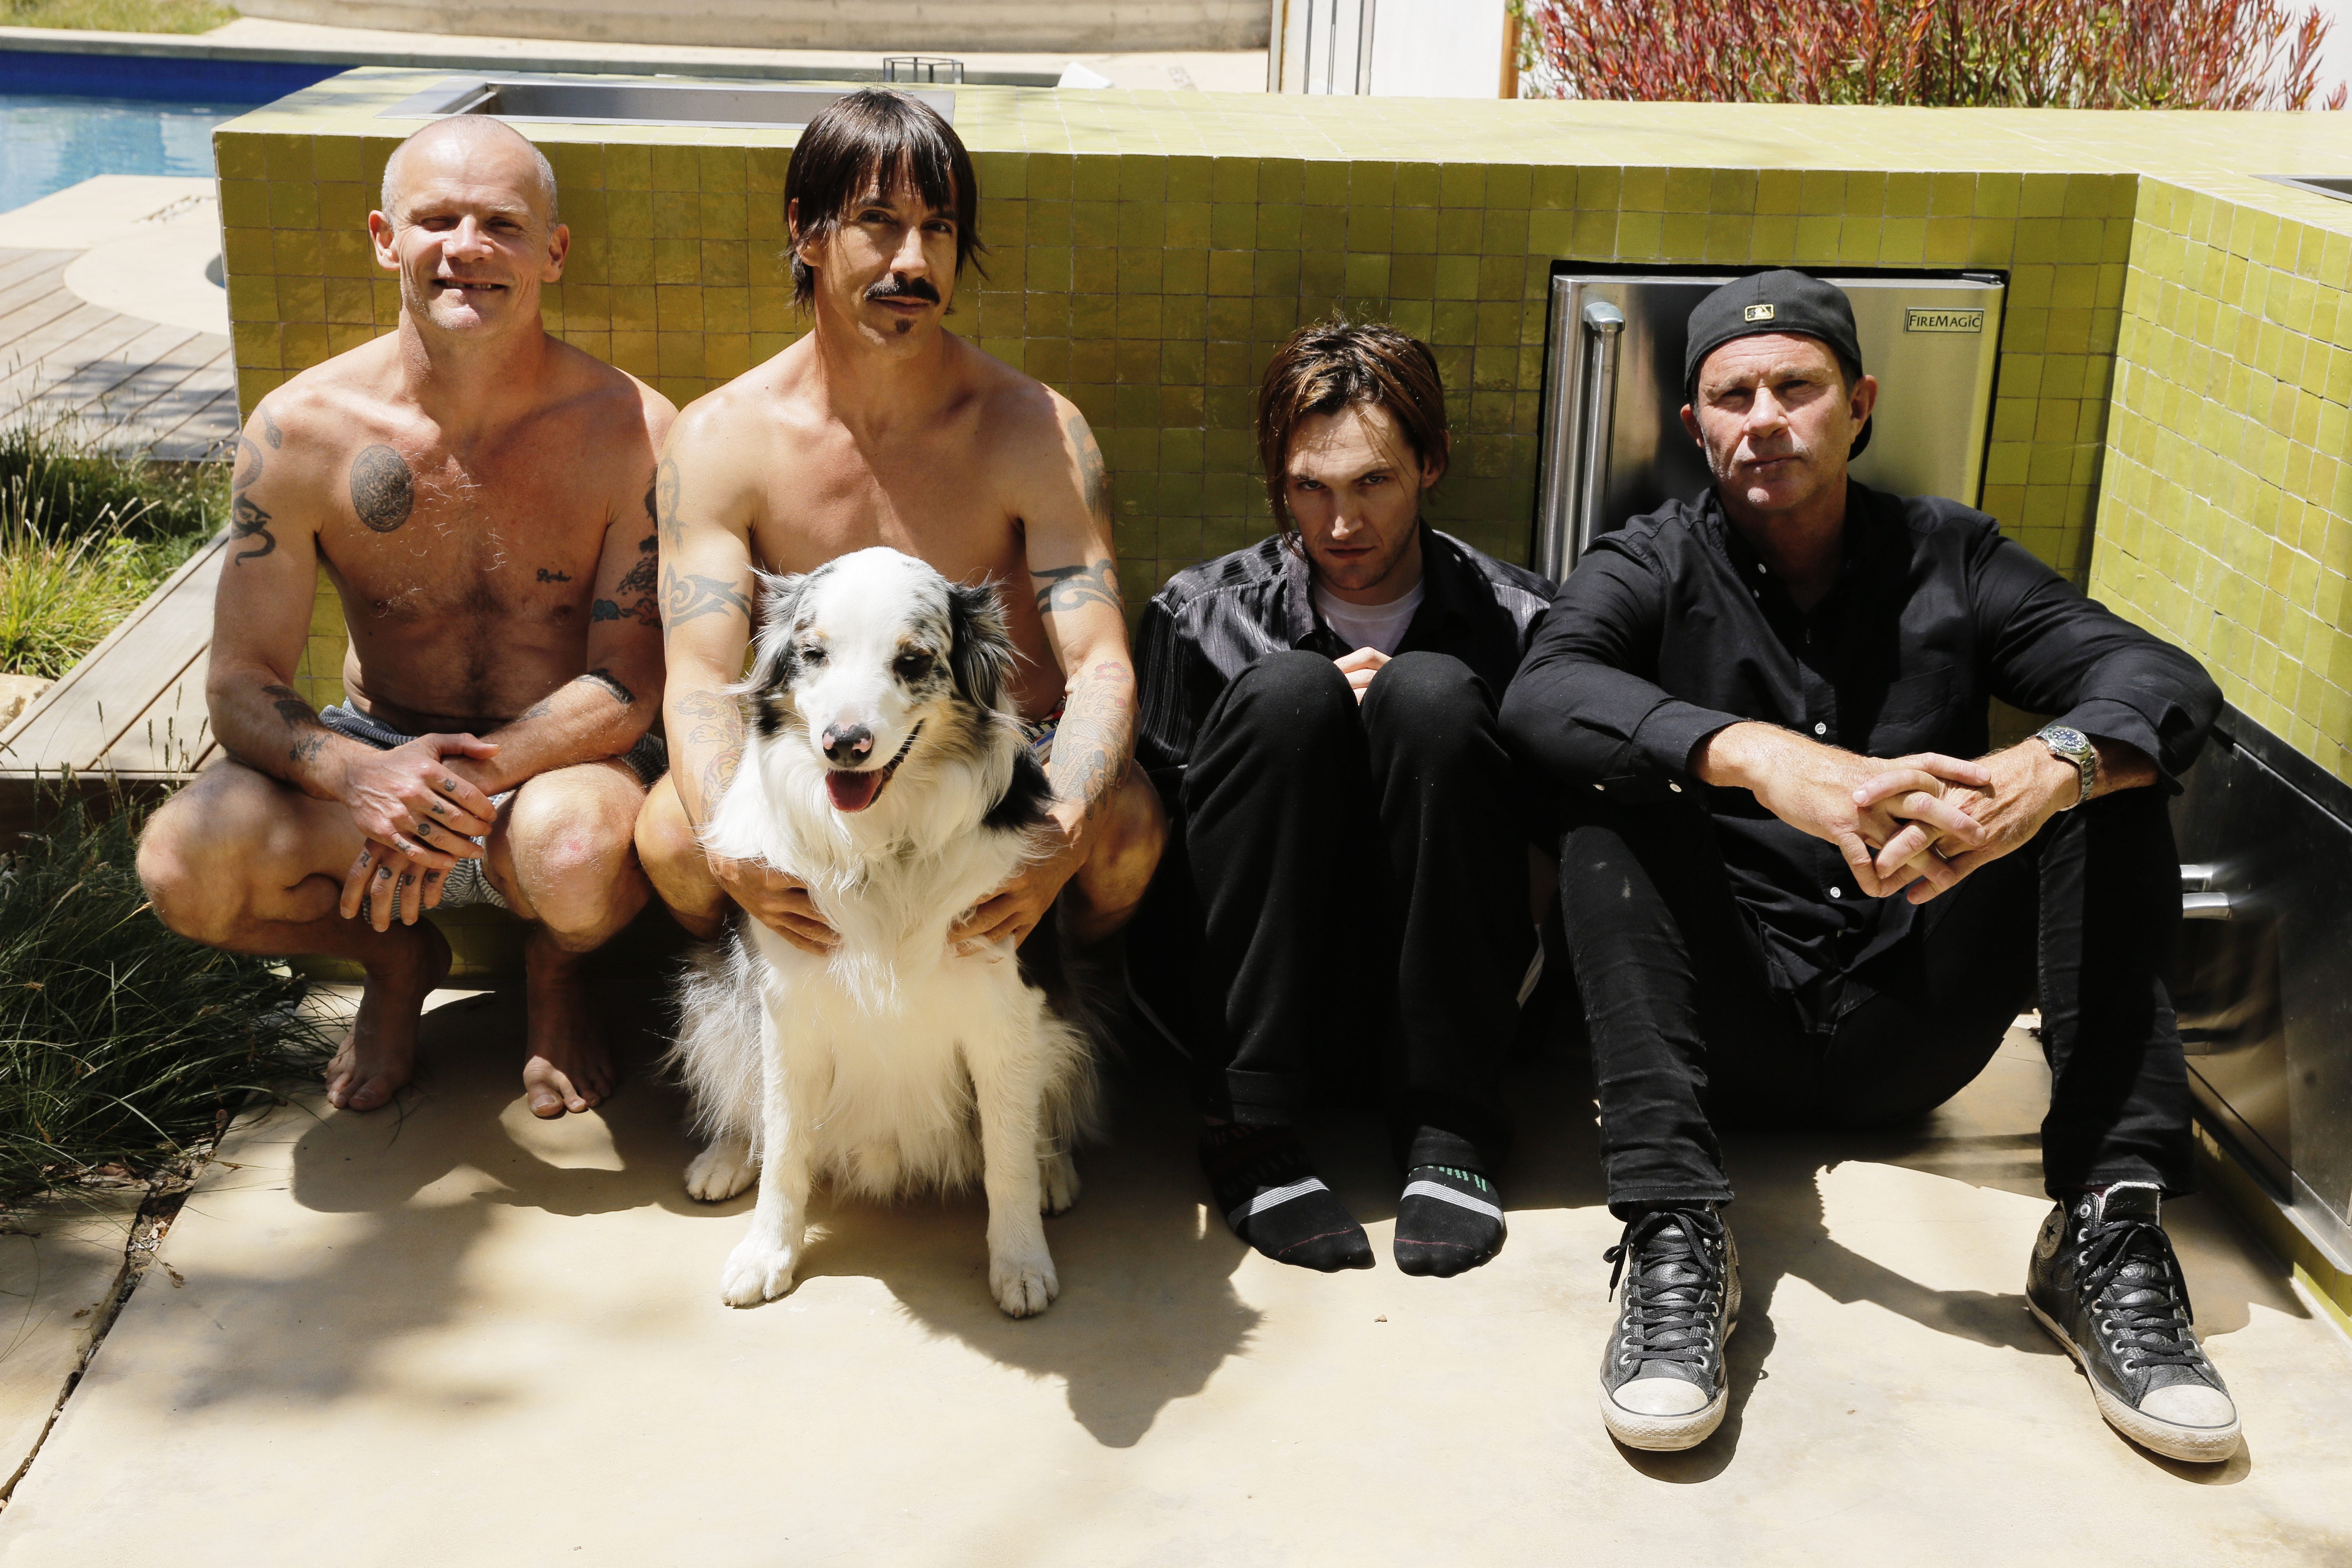 Red Hot Chili Peppers Release New Music Video For "Dark Necessities" Directed By Olivia Wilde